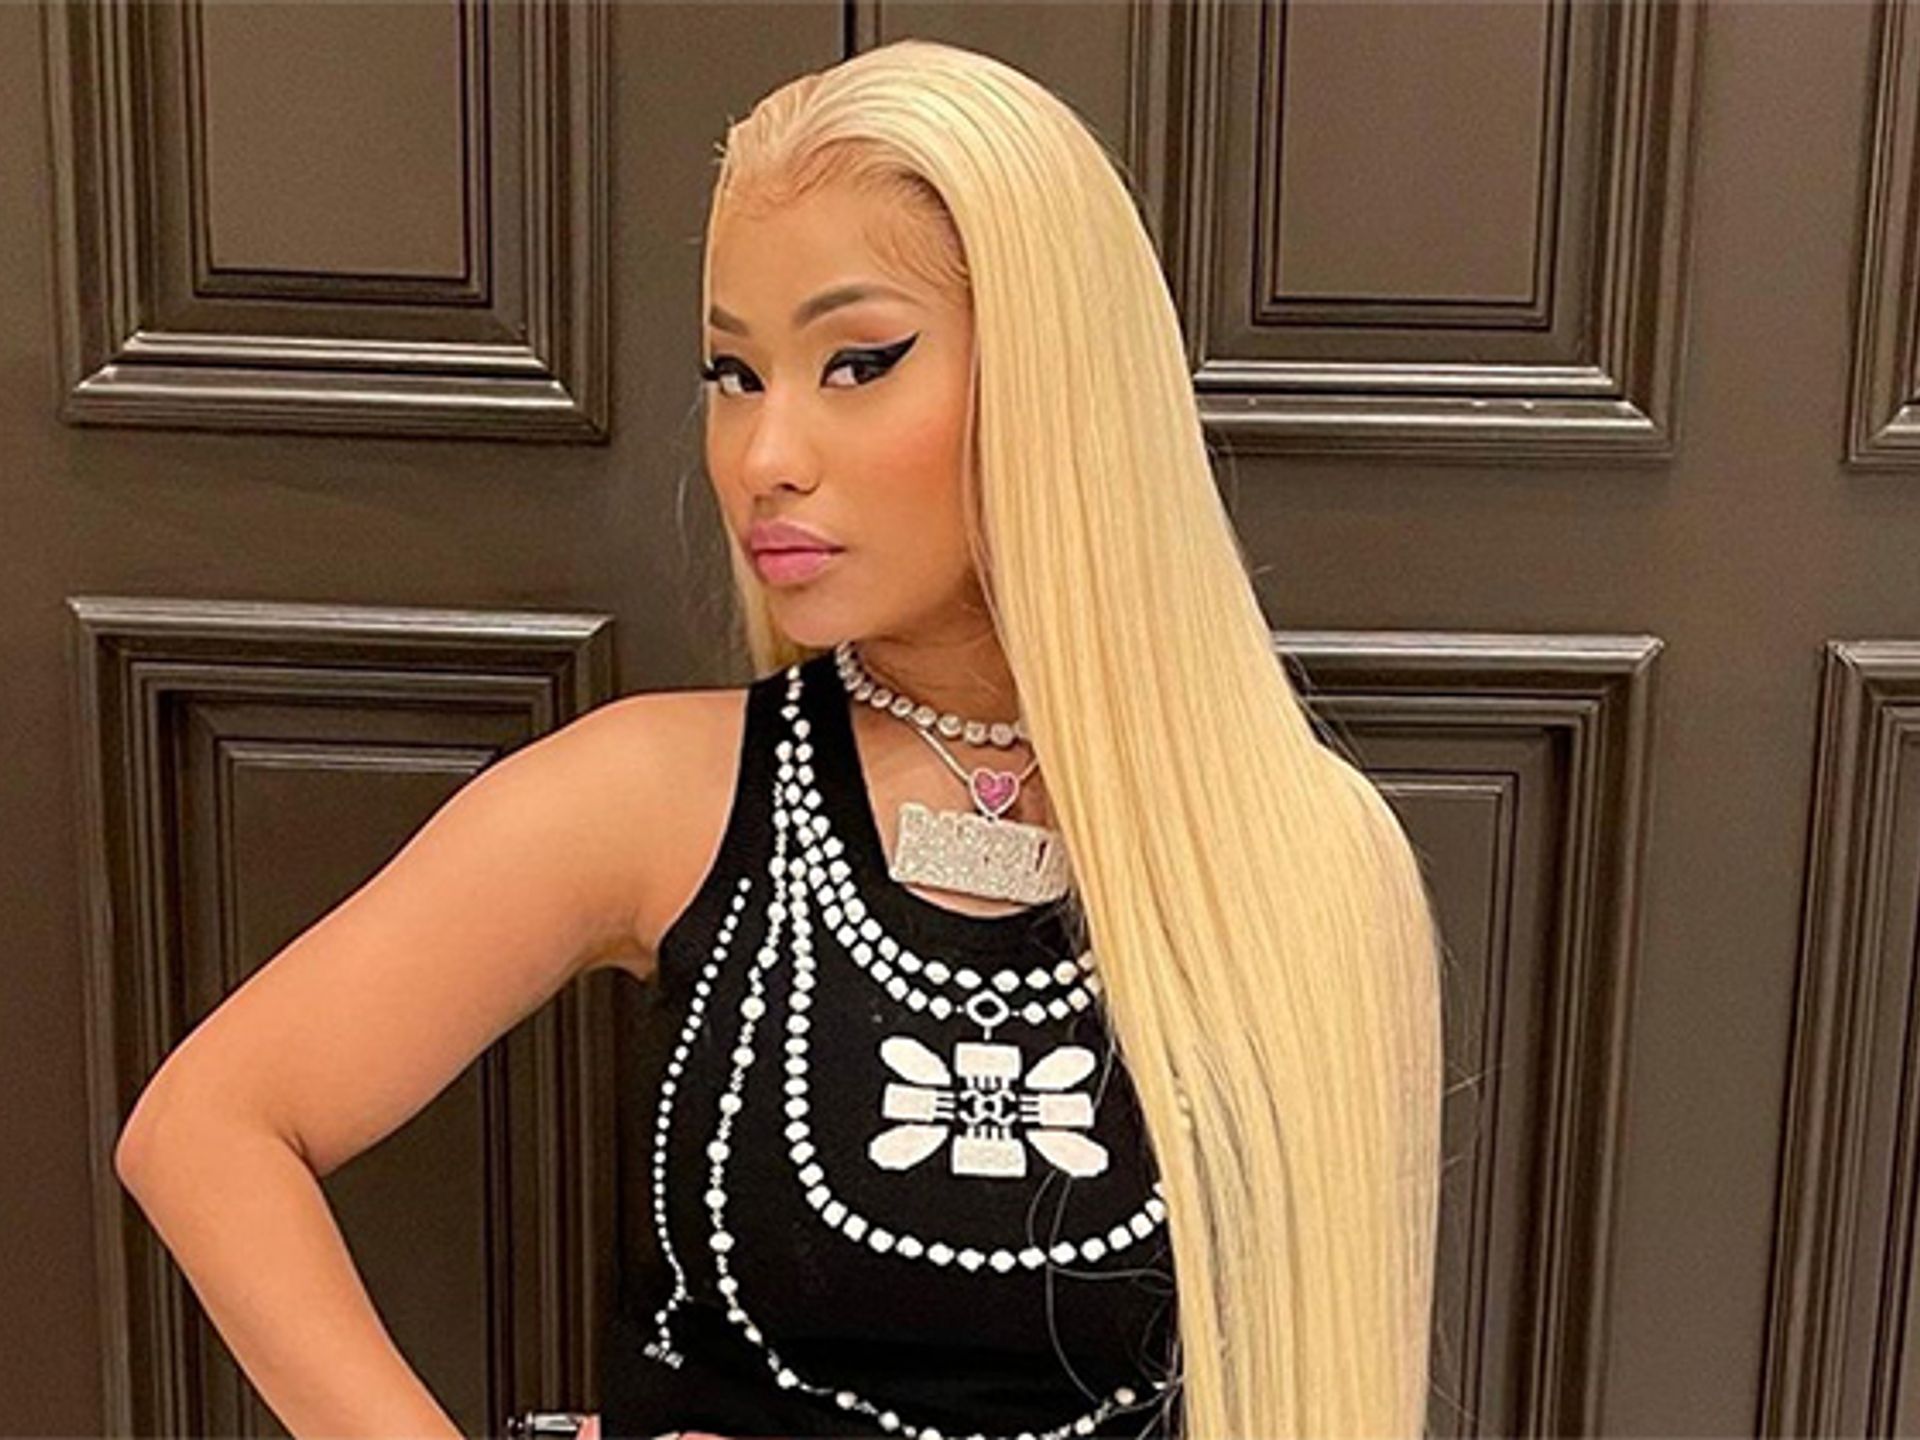 Nicki Minaj's before and after photos unearthed amid cosmetic